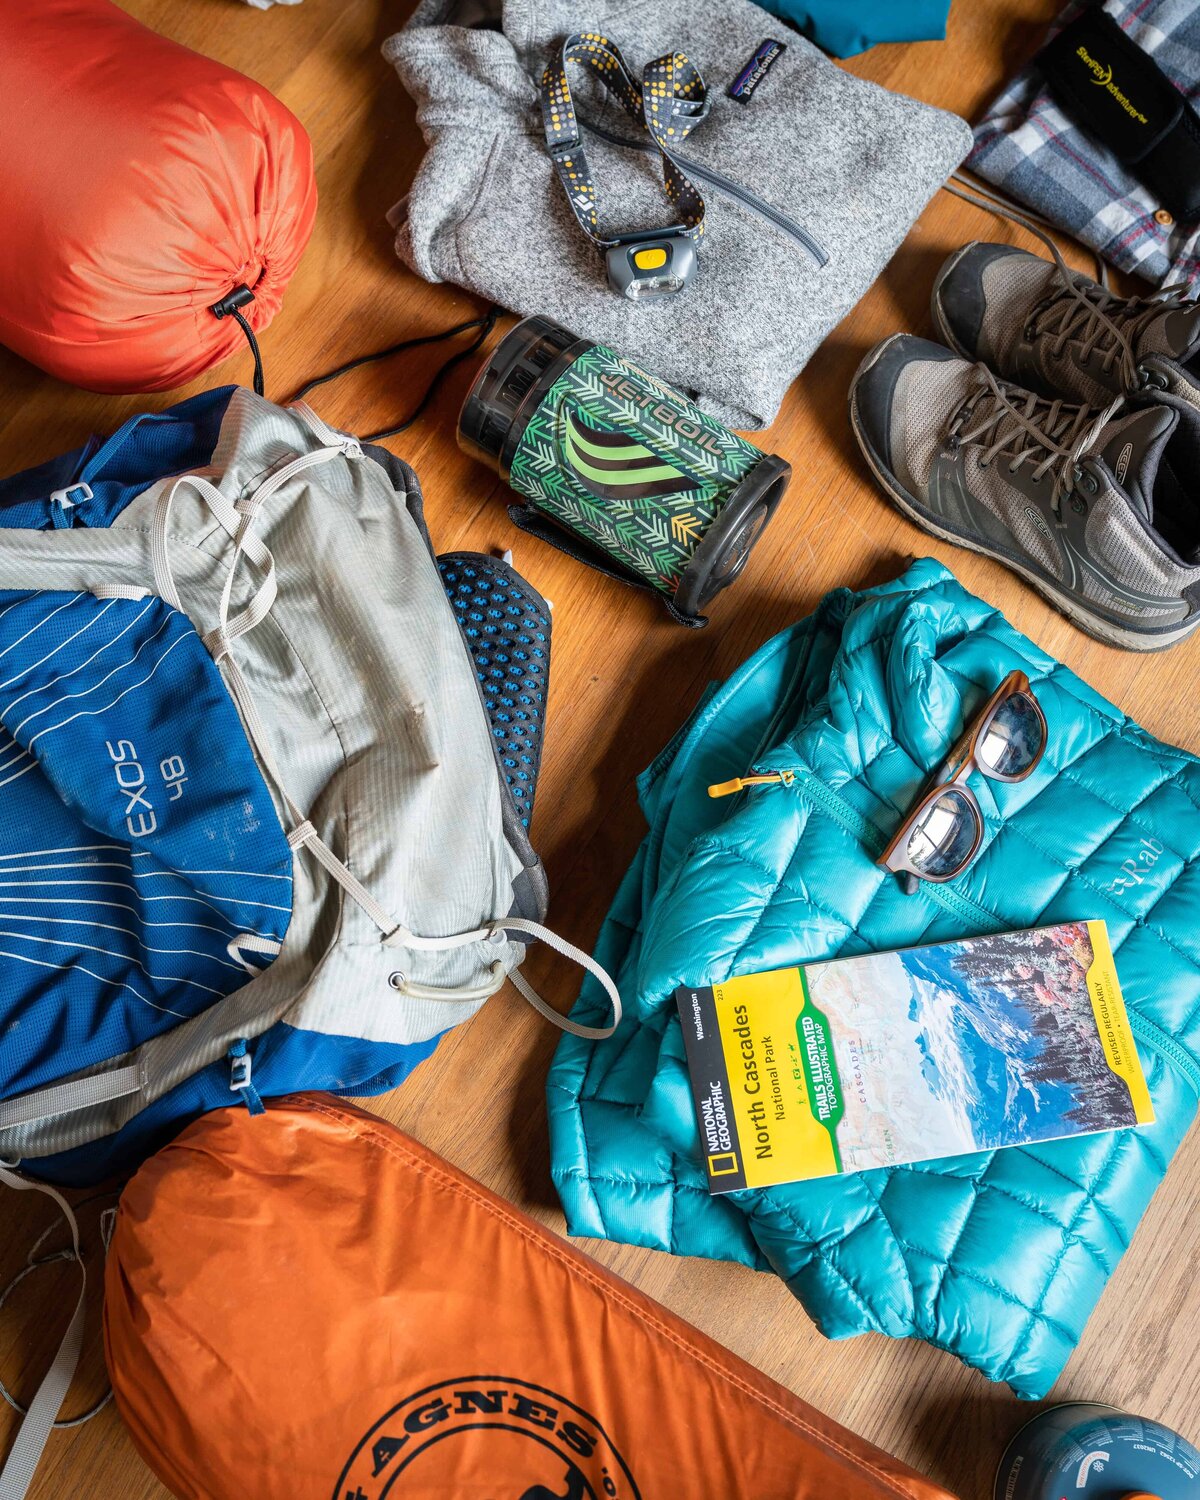 Hiking boots, coats, tents, backpacks, and gear spread out on an orange mat